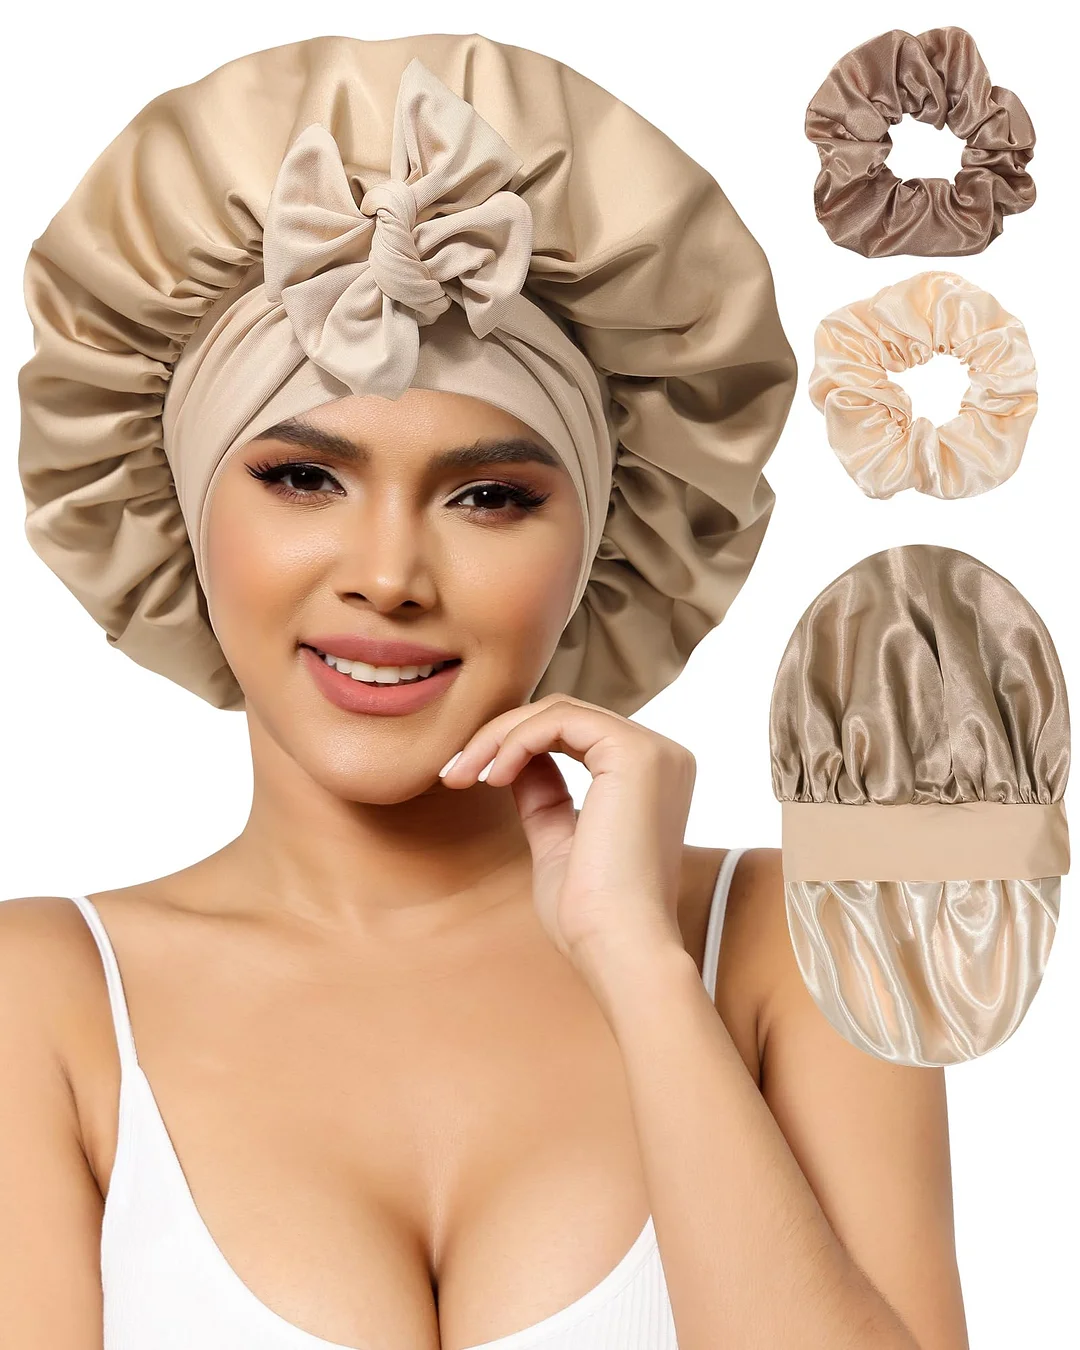 Double Layered Satin Night Caps Hair Care Bonnet Sleeping Hat Shower Caps for Women Nightcap With Elastic Tie Band